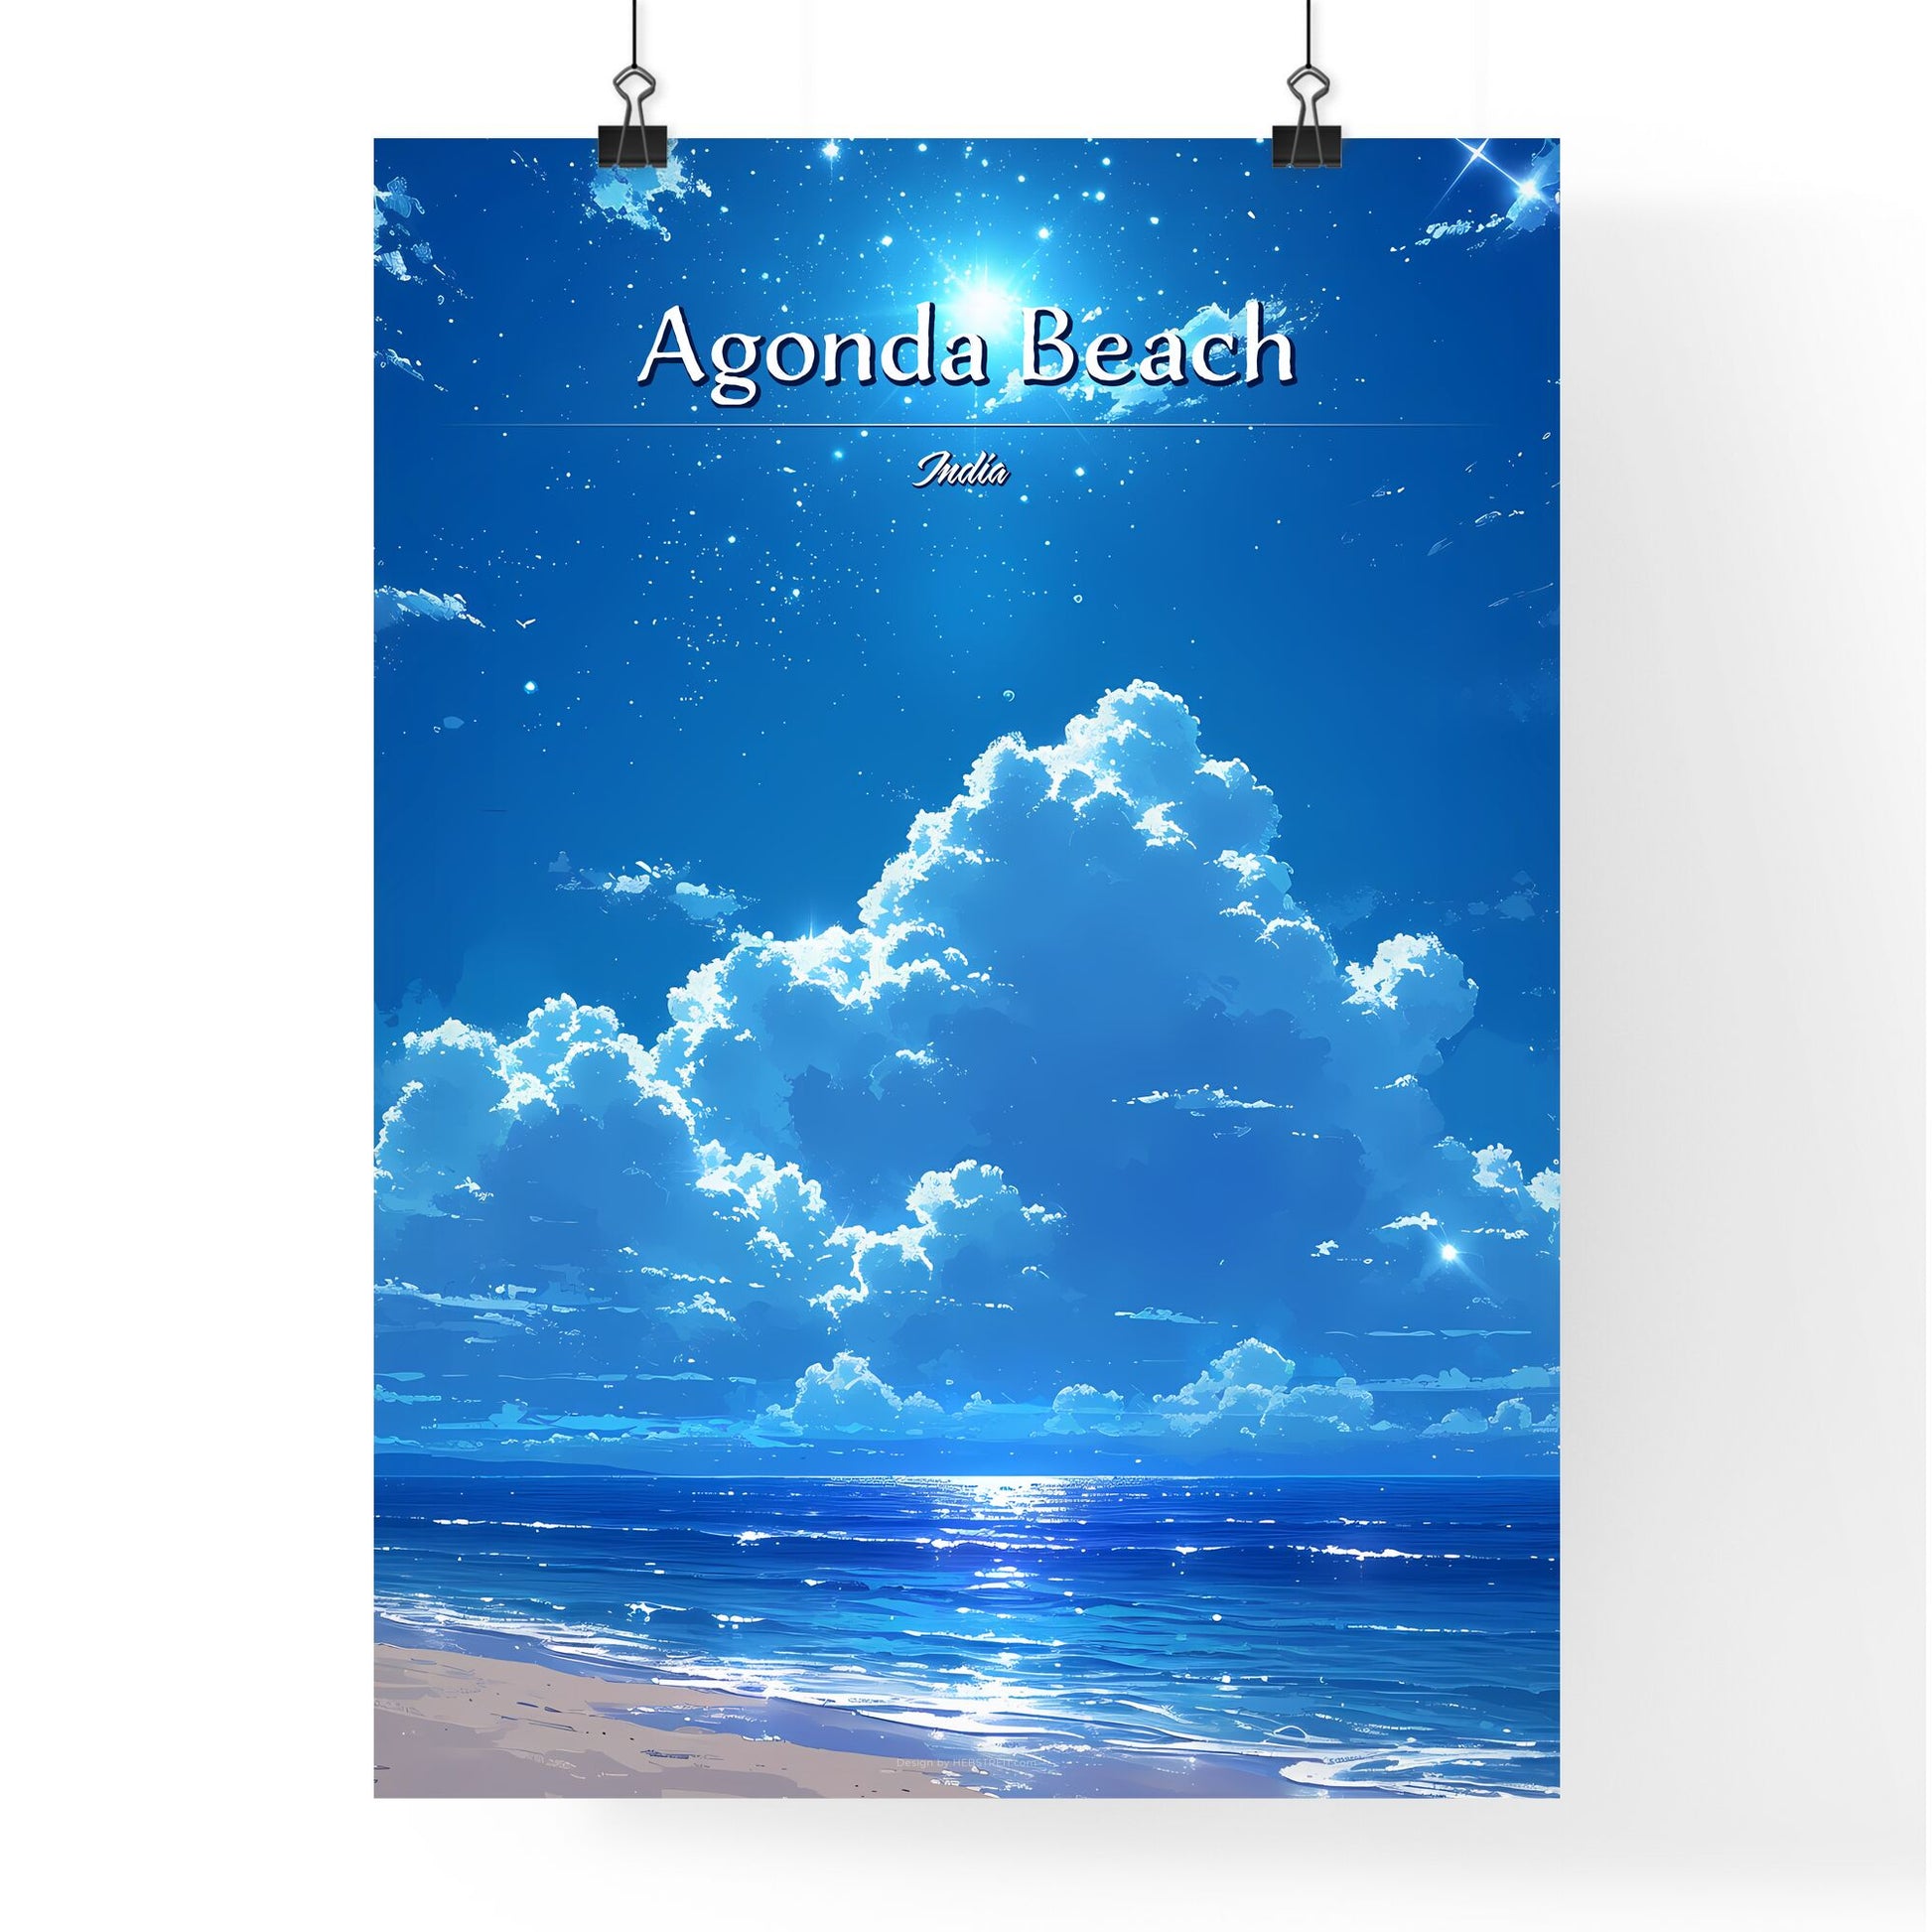 Agonda Beach - Art print of a blue sky with clouds and water Default Title